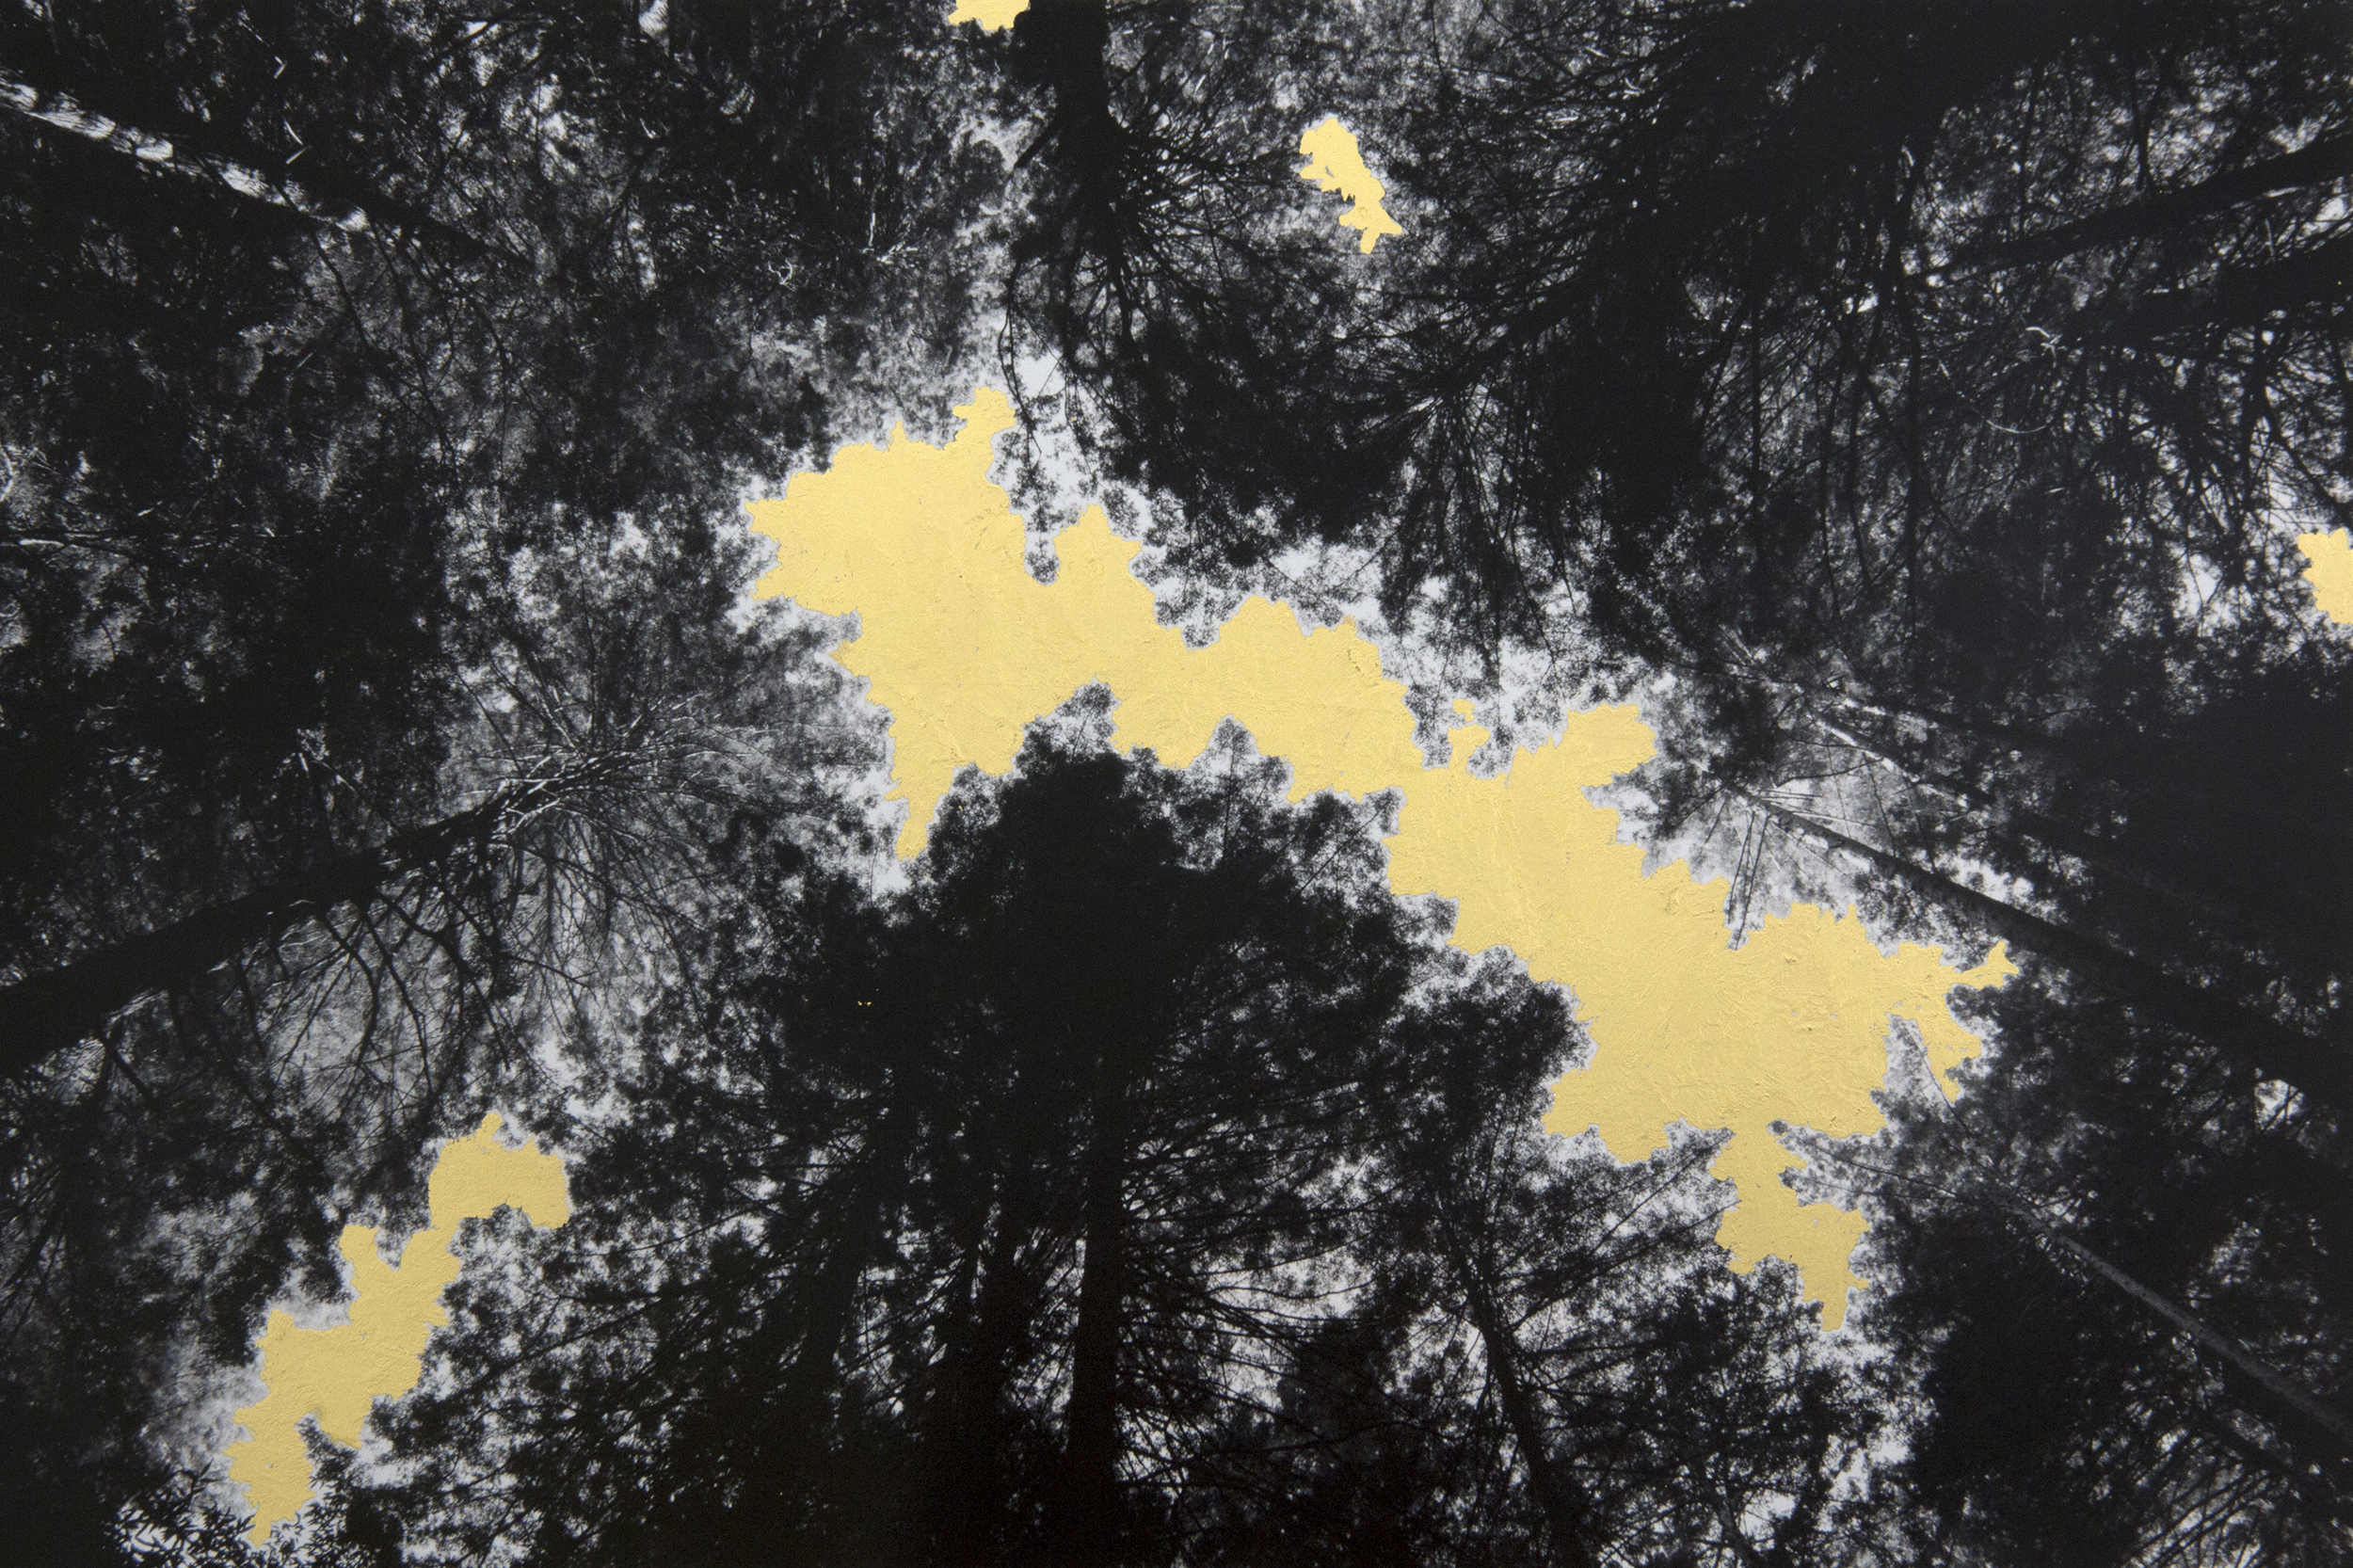 Canopy, 2014, digital pigment print with 22K gold leaf